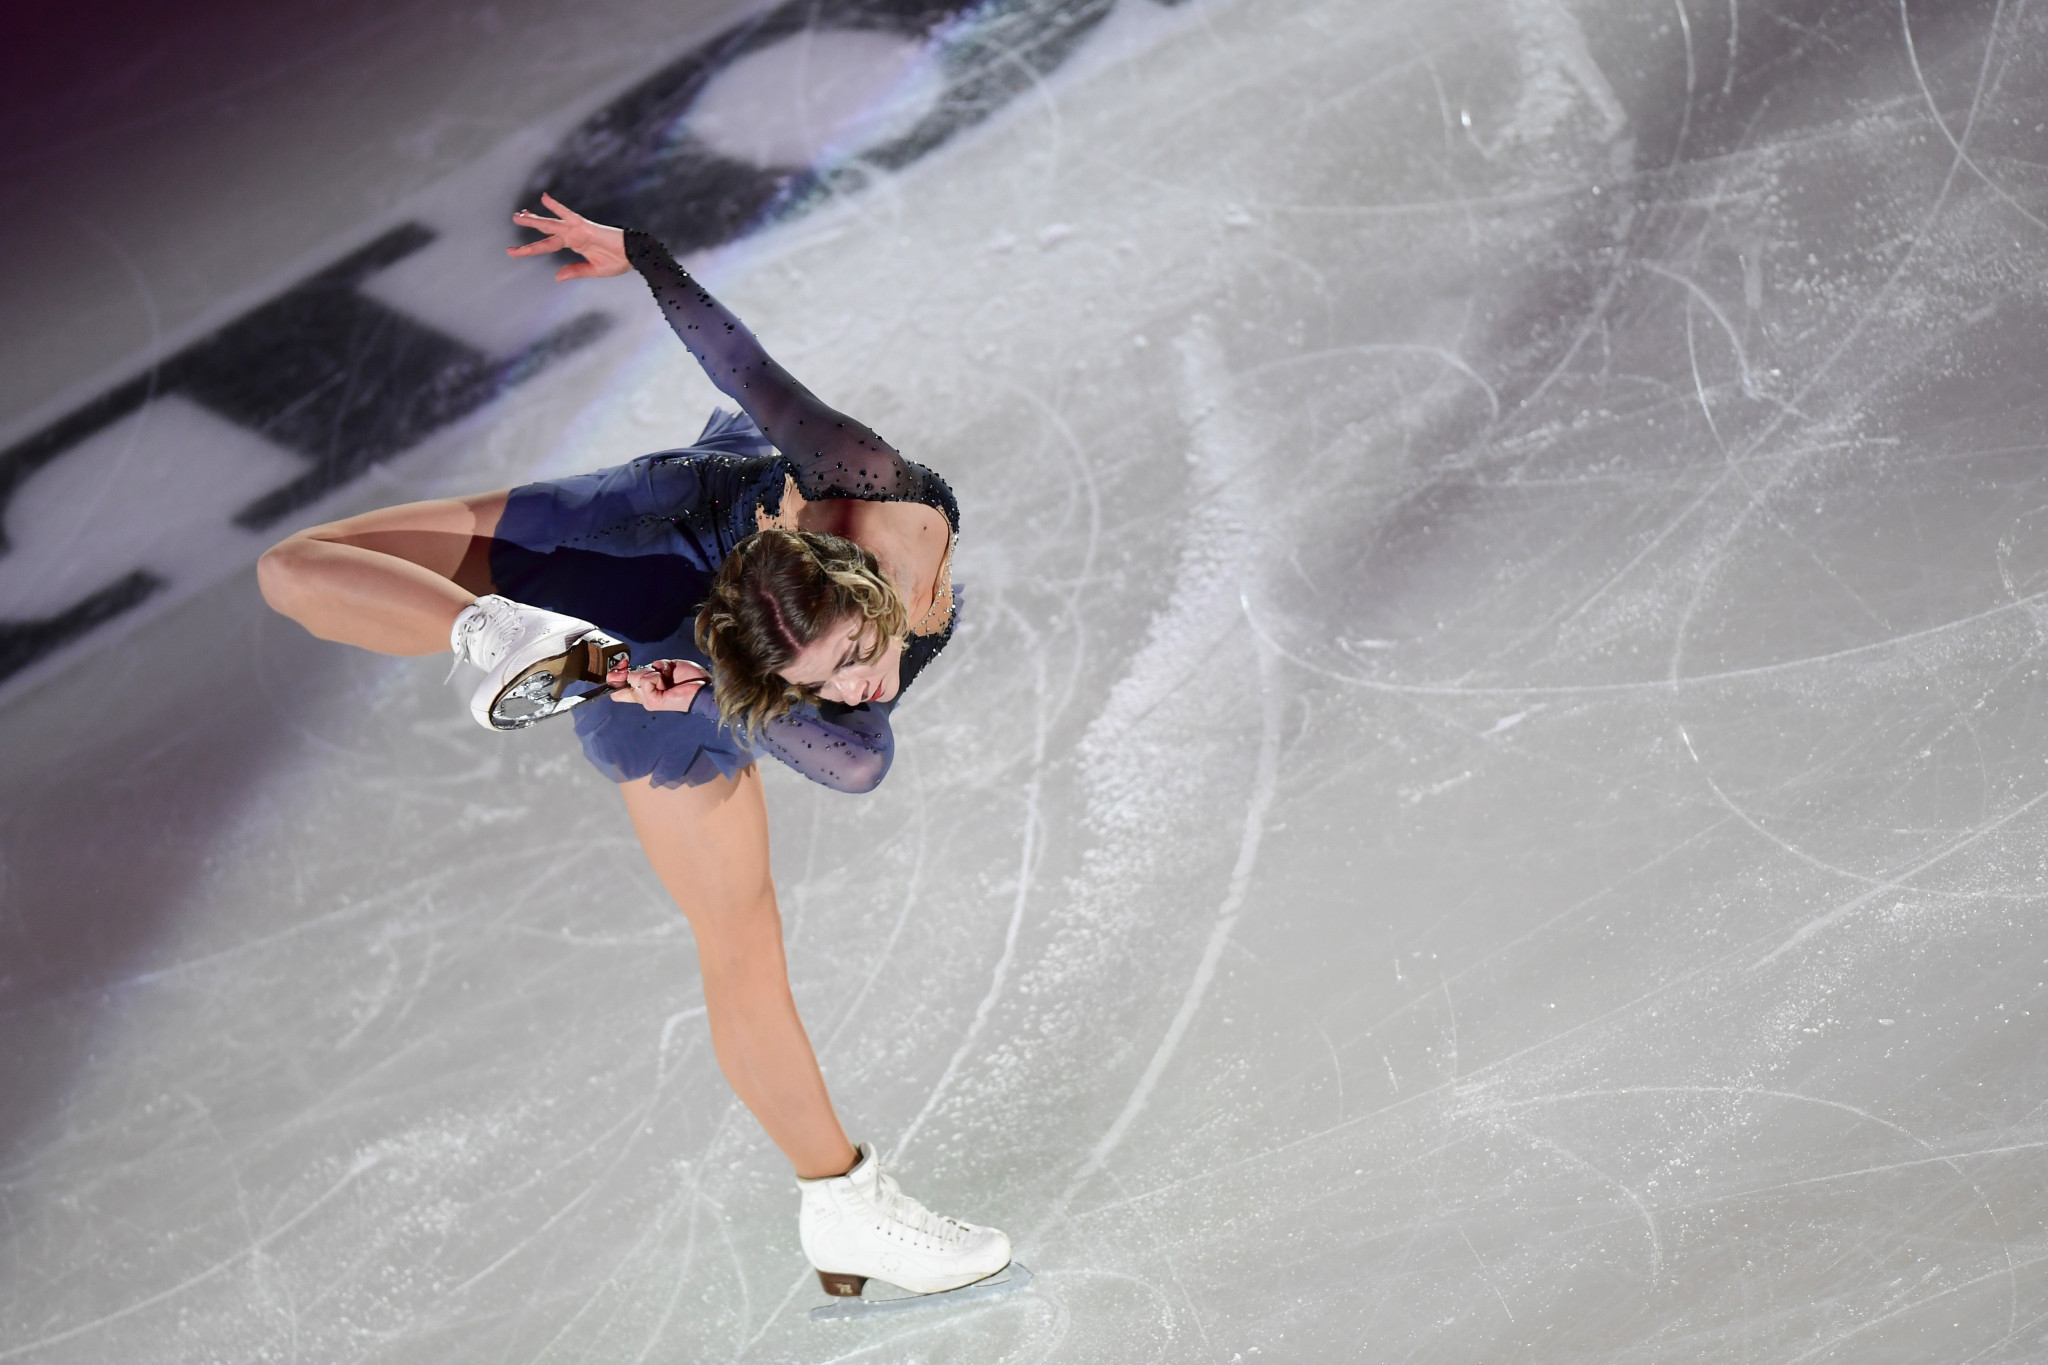 French figure skater Lecavelier tests positive for cocaine